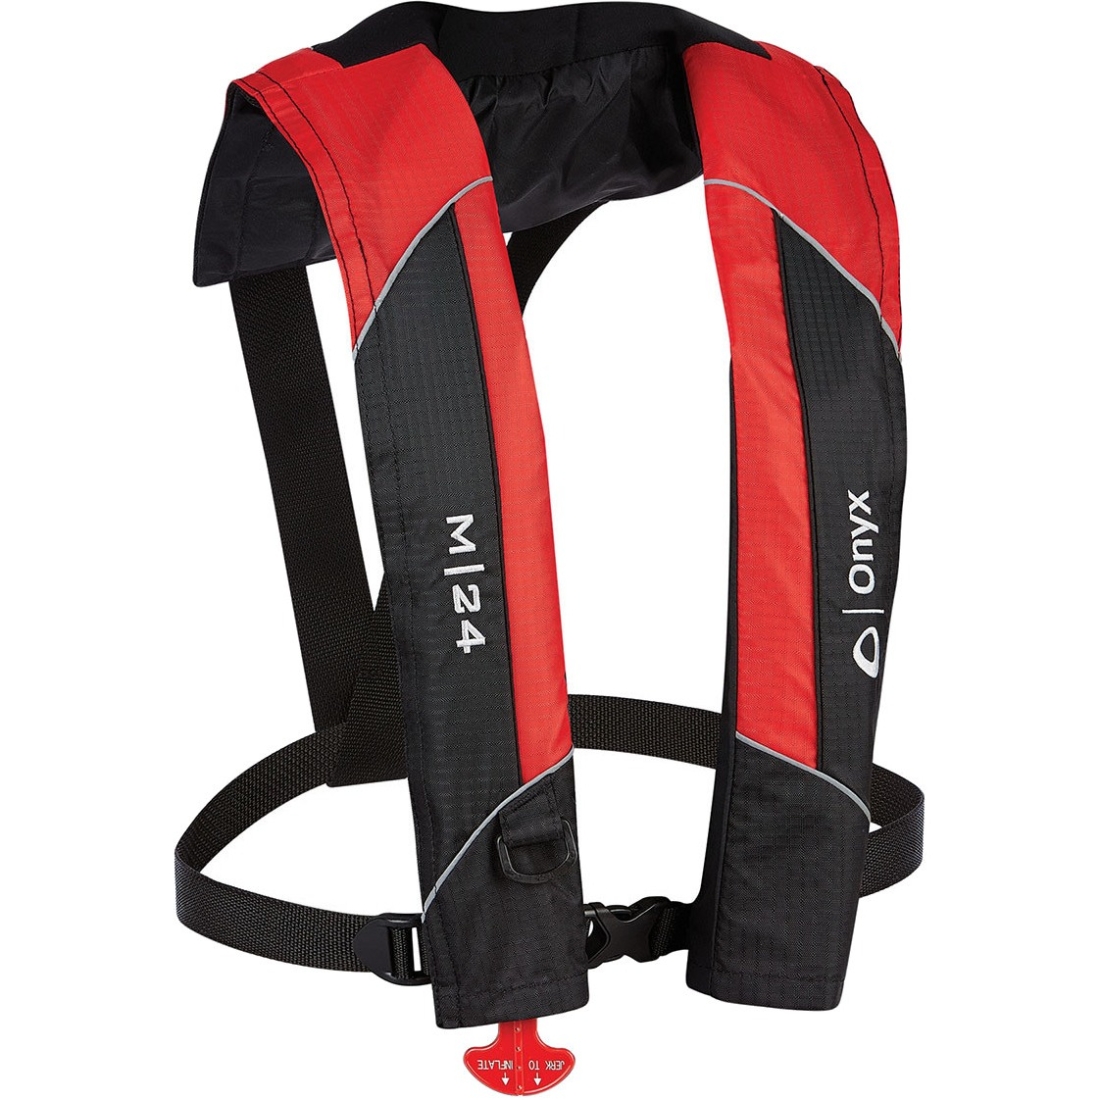 Onyx #131000-100-004-15 M-24 Manual Inflatable Life Jacket, Red - image 2 of 5